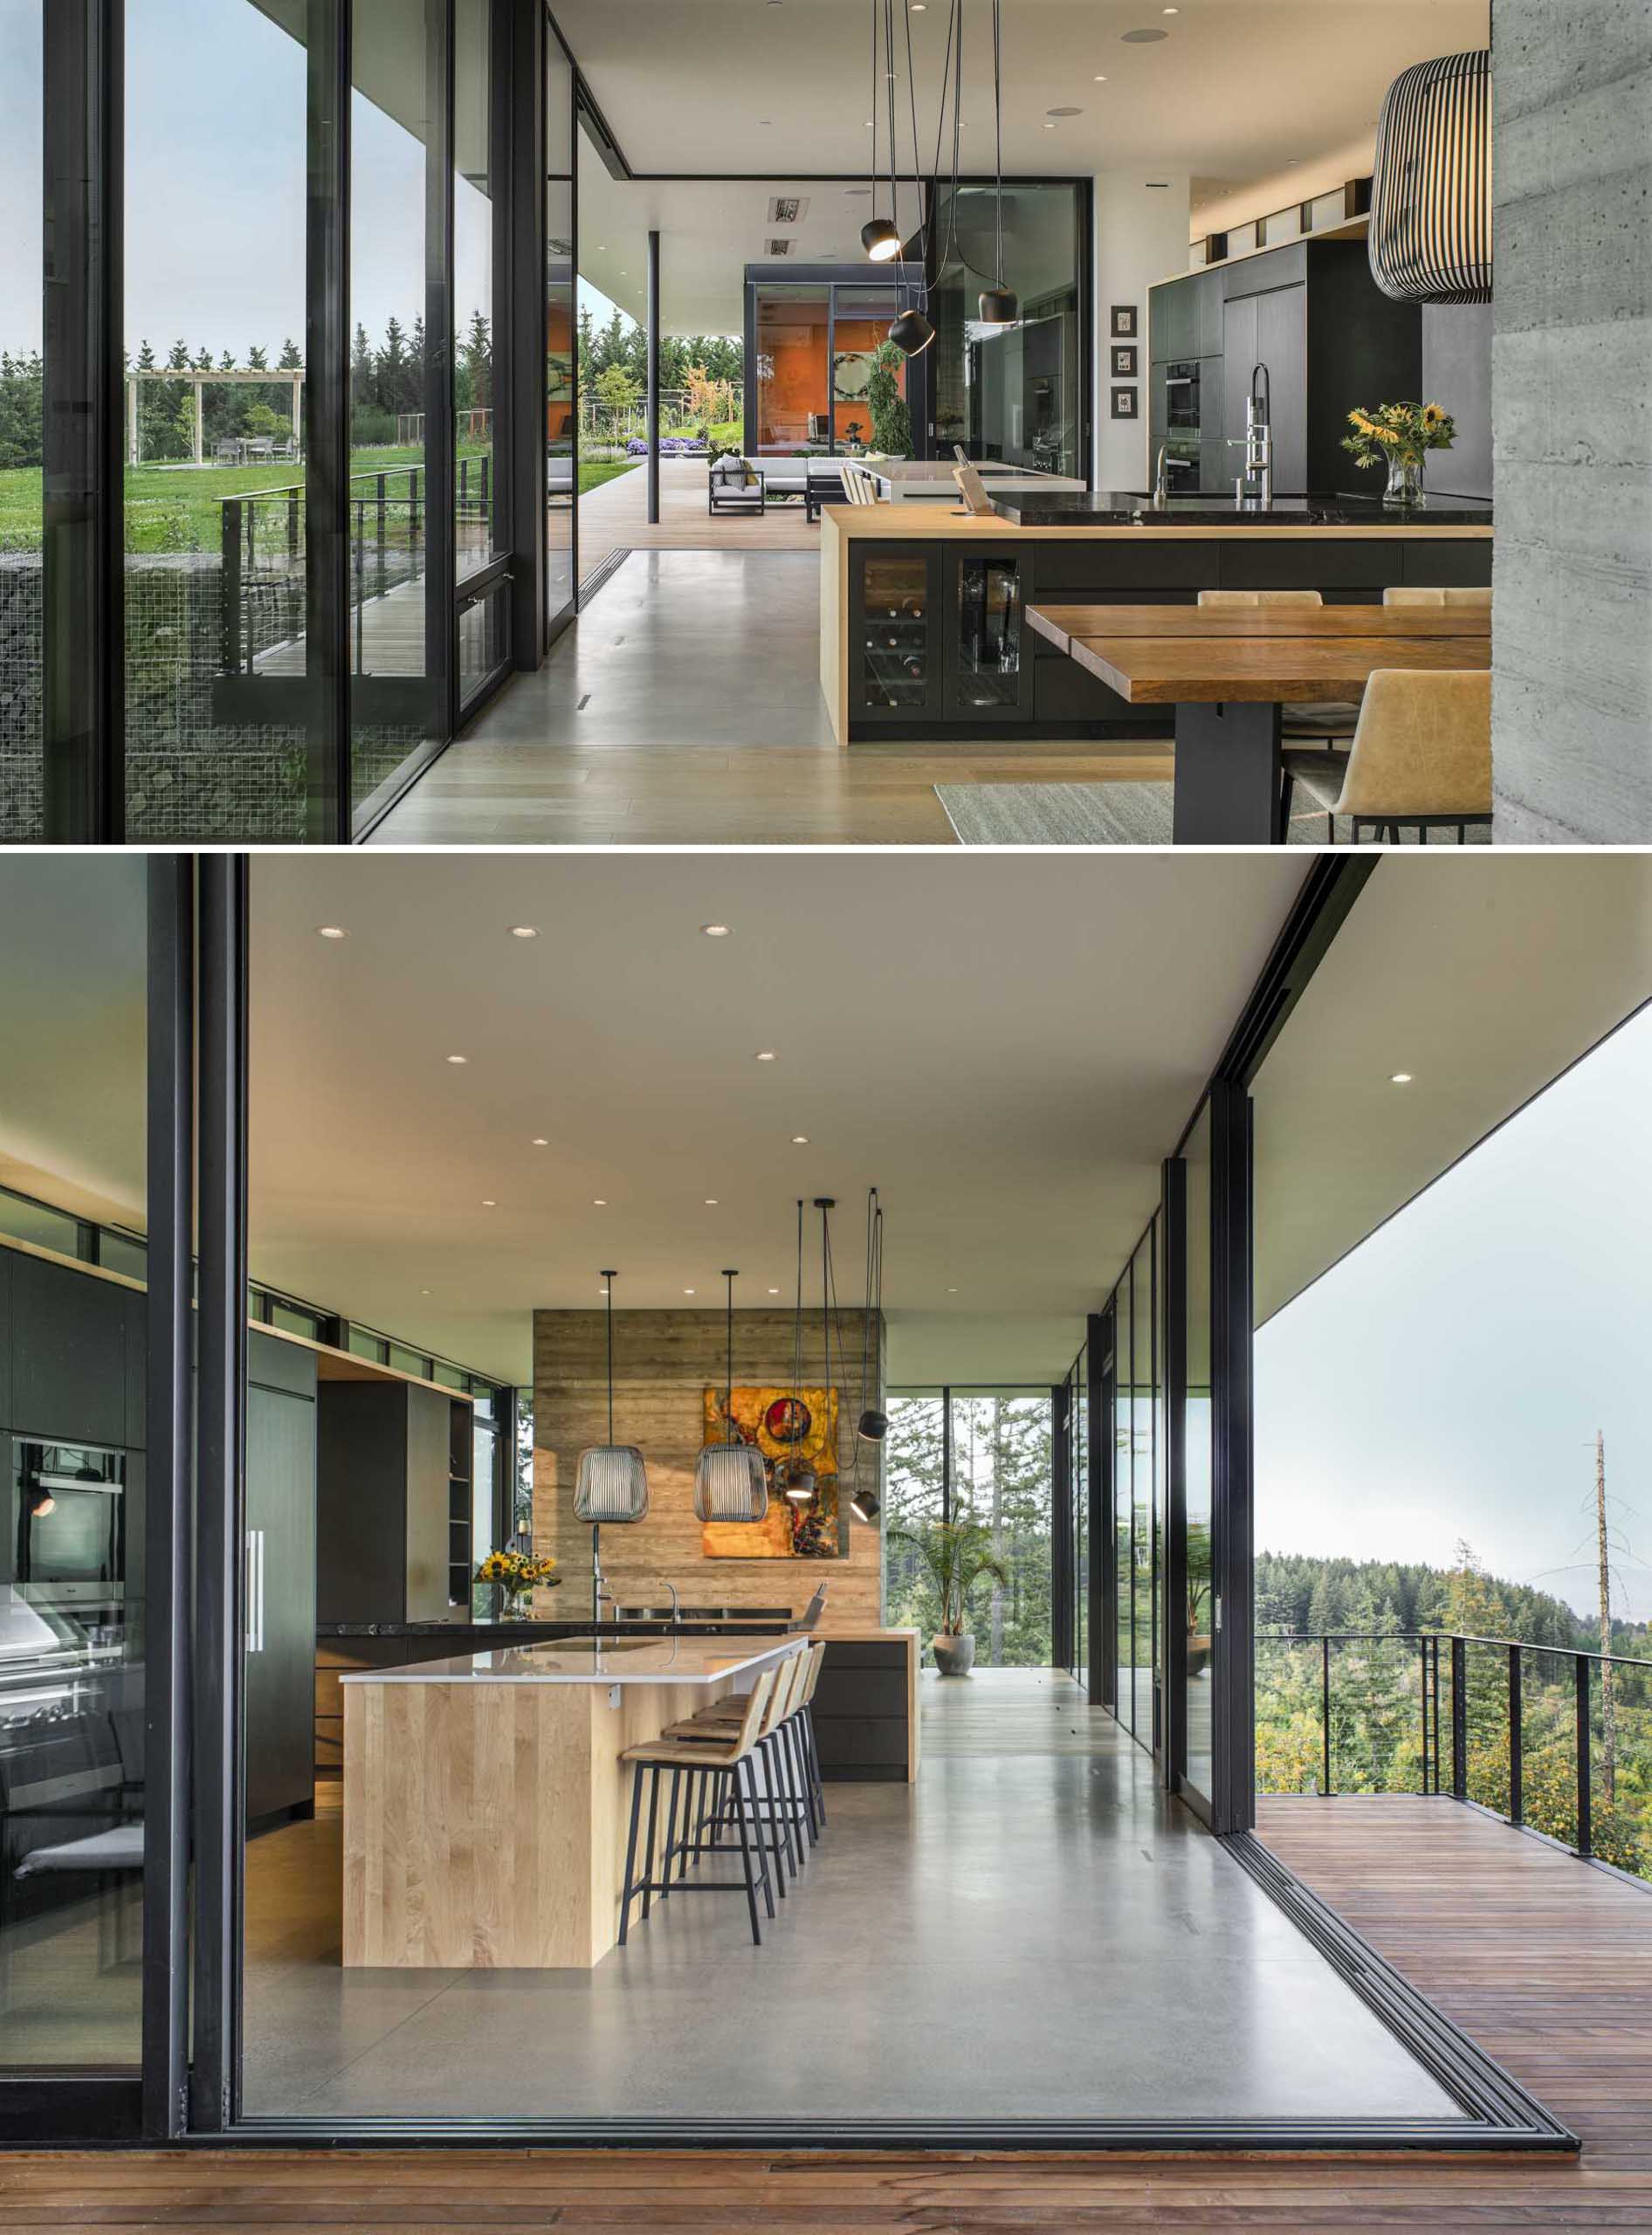 In this modern kitchen, the floors change from wood to polished concrete, while the black cabinets complement the black window frames.